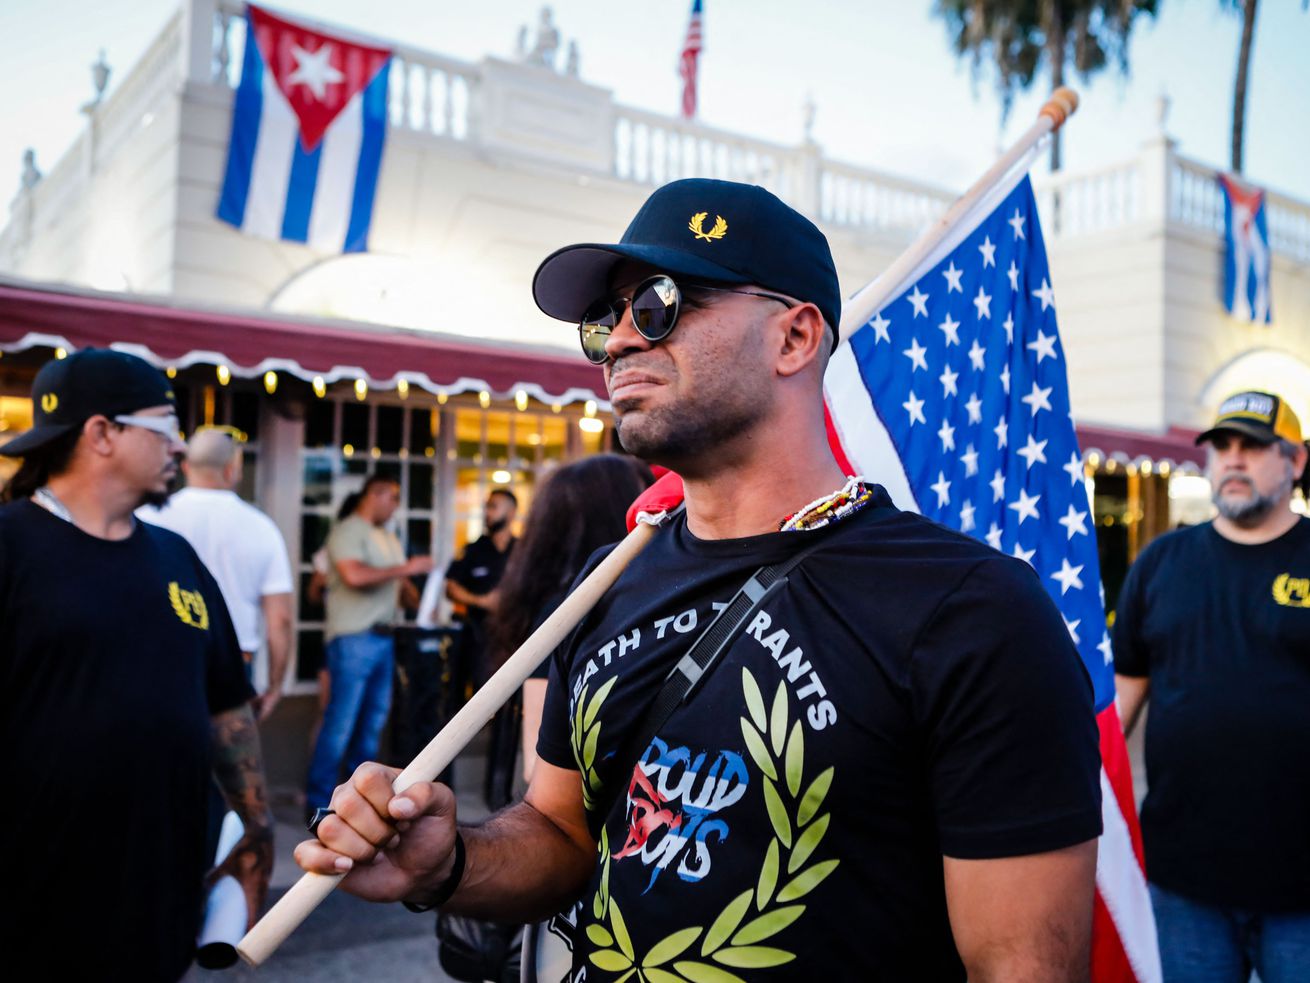 Tarrio wears a black shirt emblazoned with the Proud Boys logo, sunglasses, and a black baseball cap, and carries an American flag over his shoulder during a protest in Miami, Florida, on July 16, 2021.